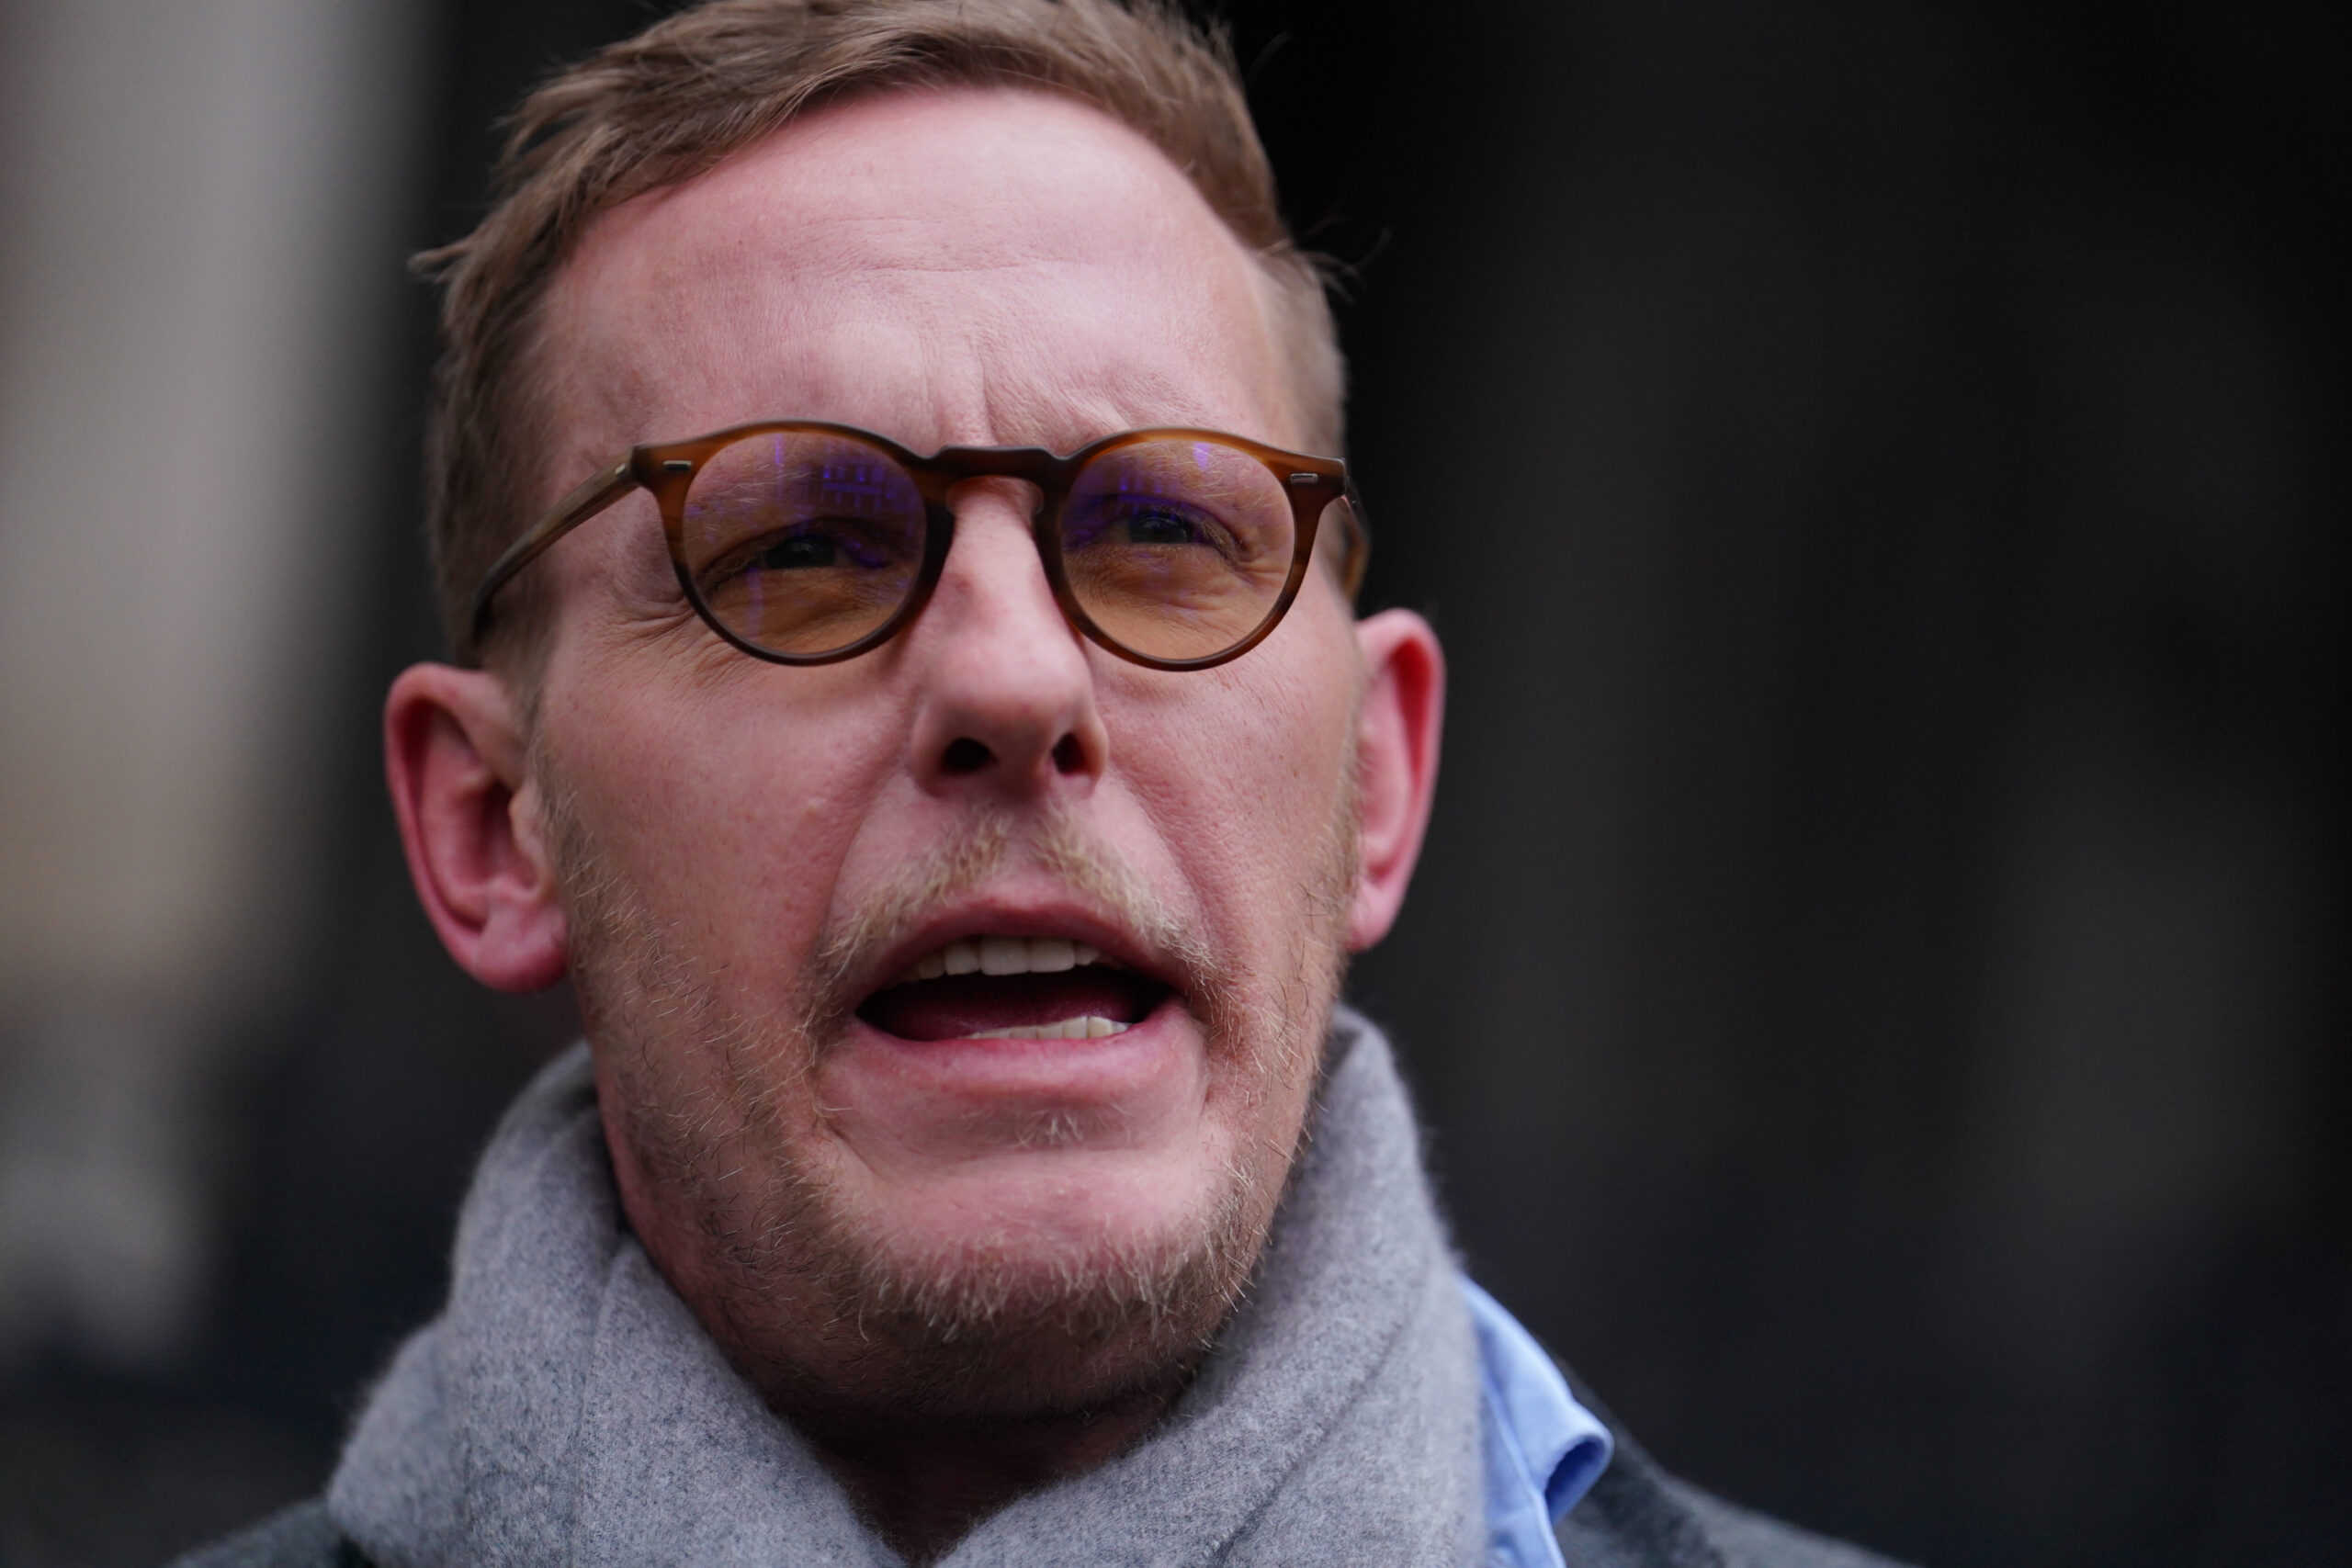 Laurence Fox performed the Haka in court… twice